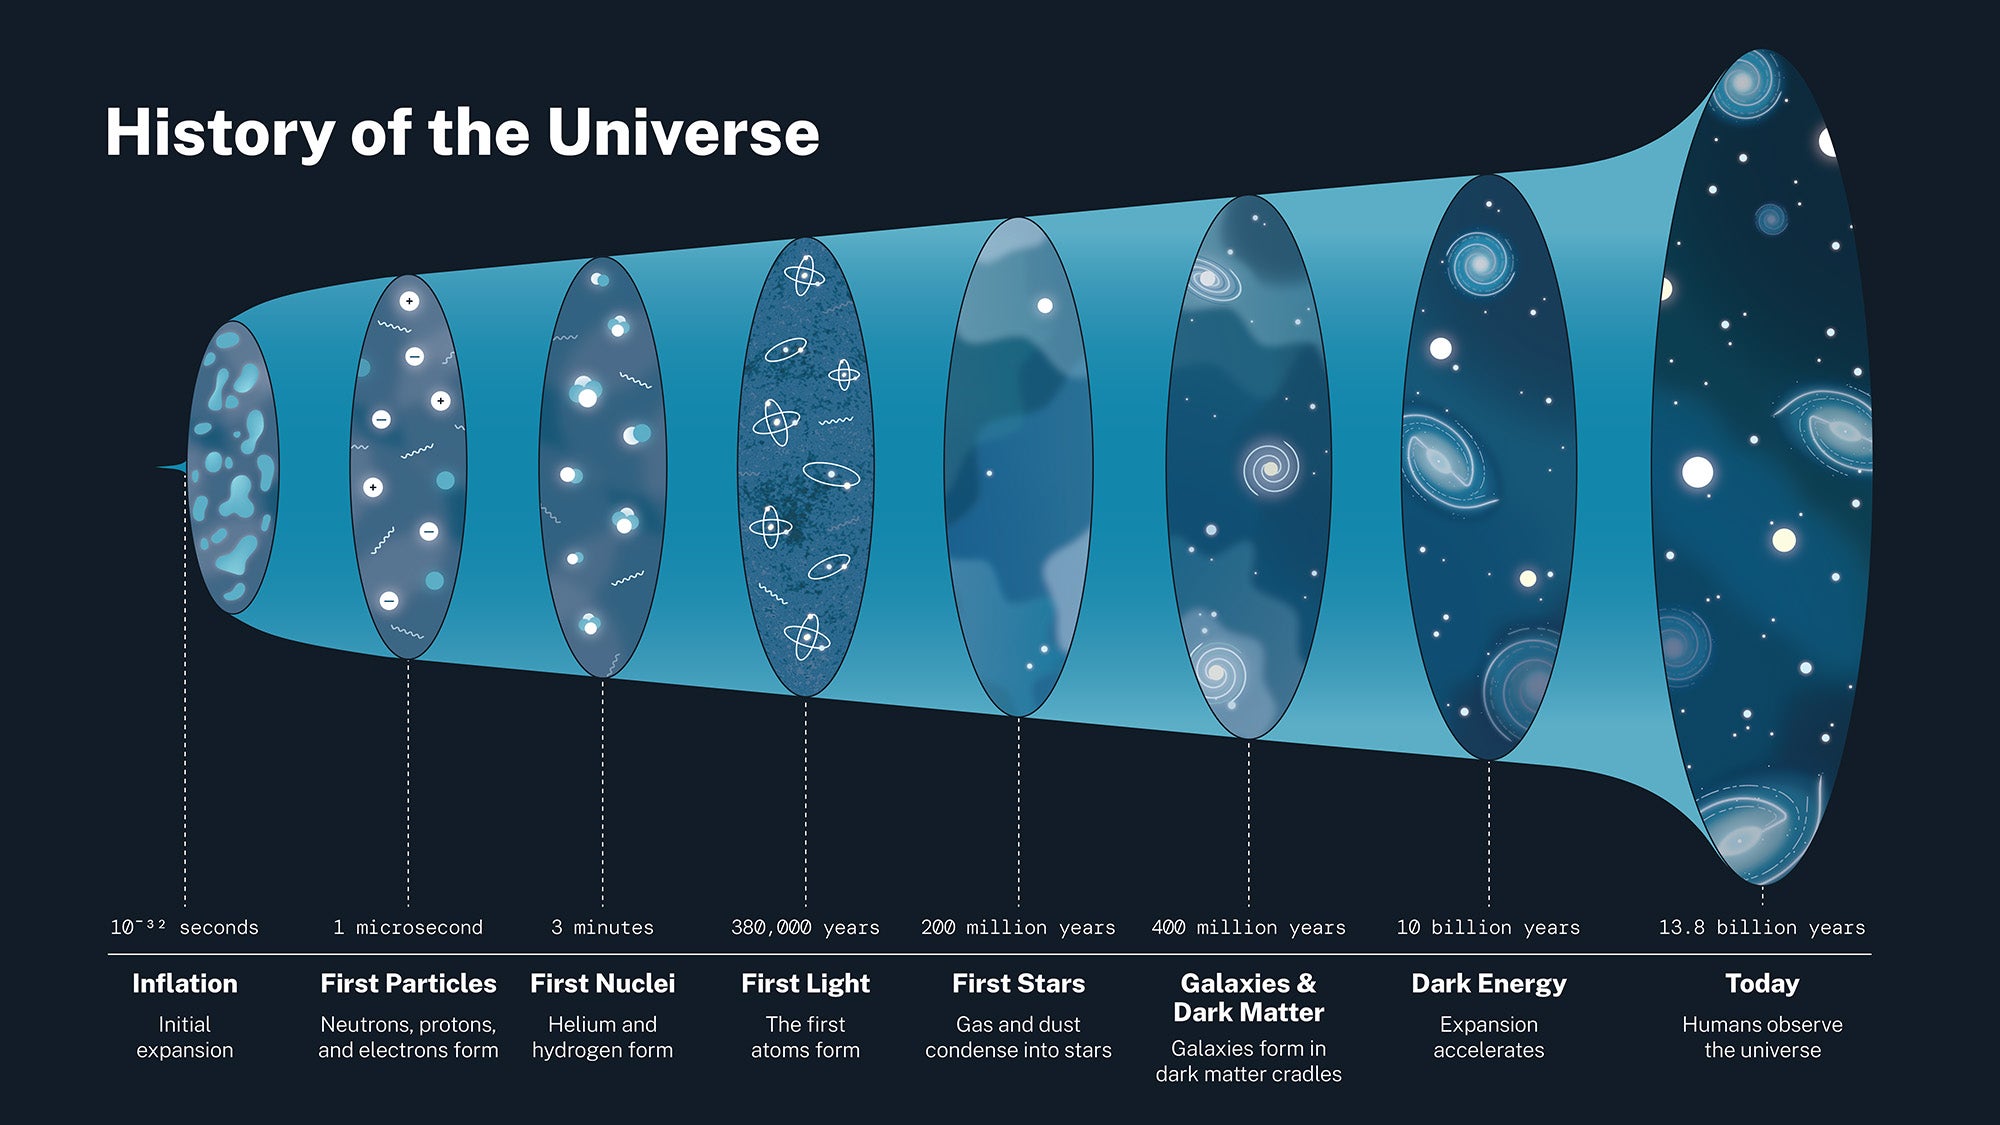 The history of the universe is outlined in this infographic.